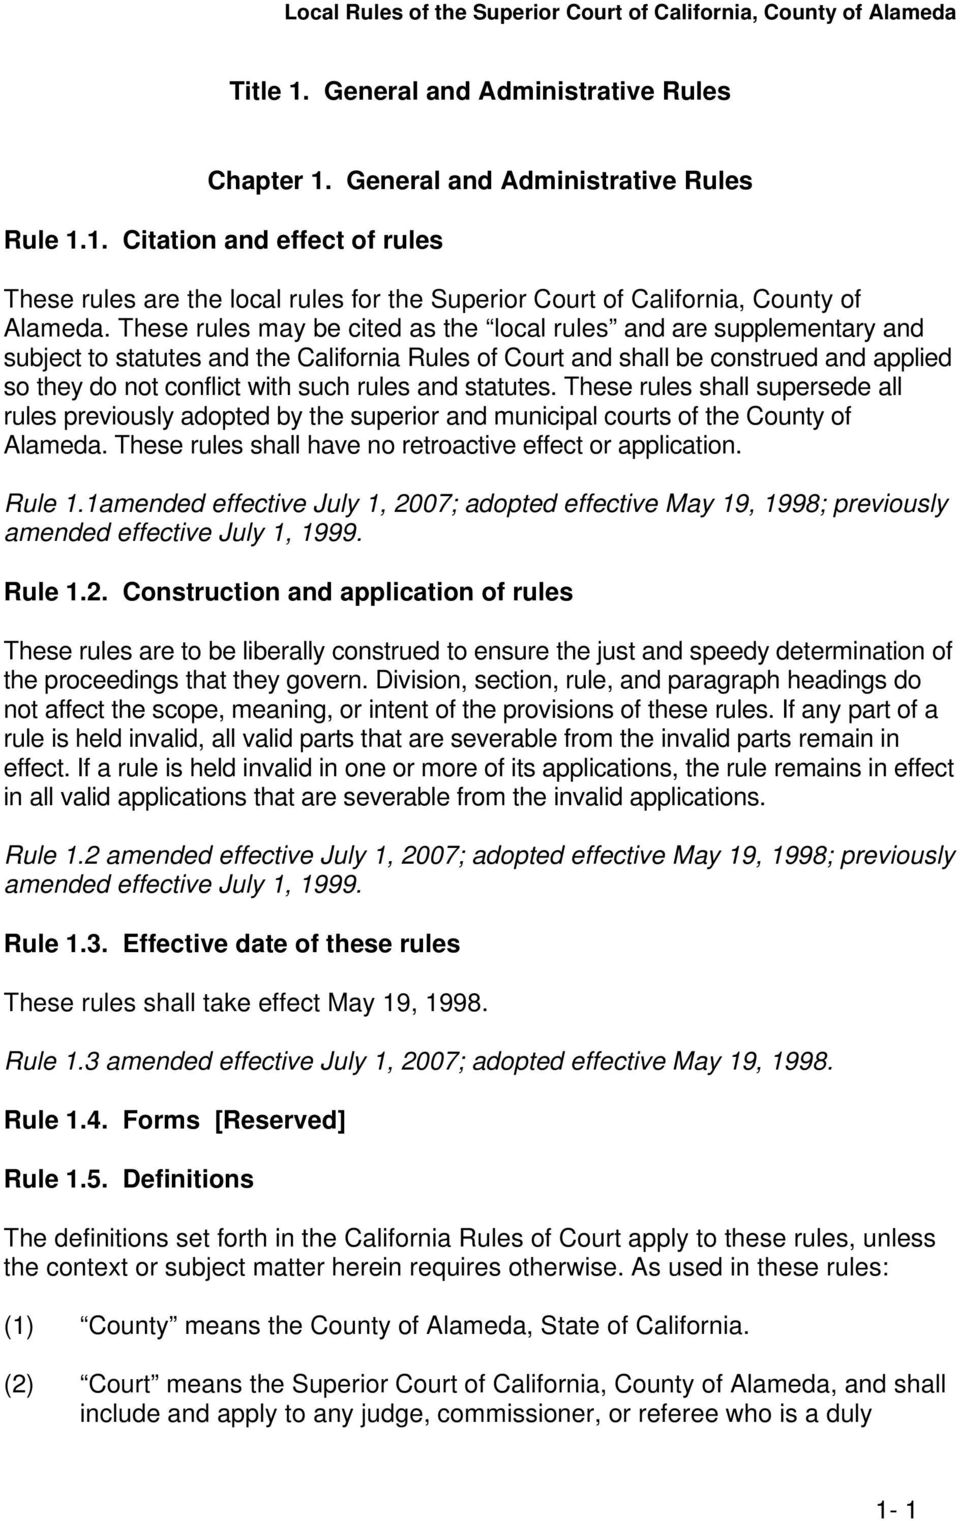 and statutes. These rules shall supersede all rules previously adopted by the superior and municipal courts of the County of Alameda. These rules shall have no retroactive effect or application.